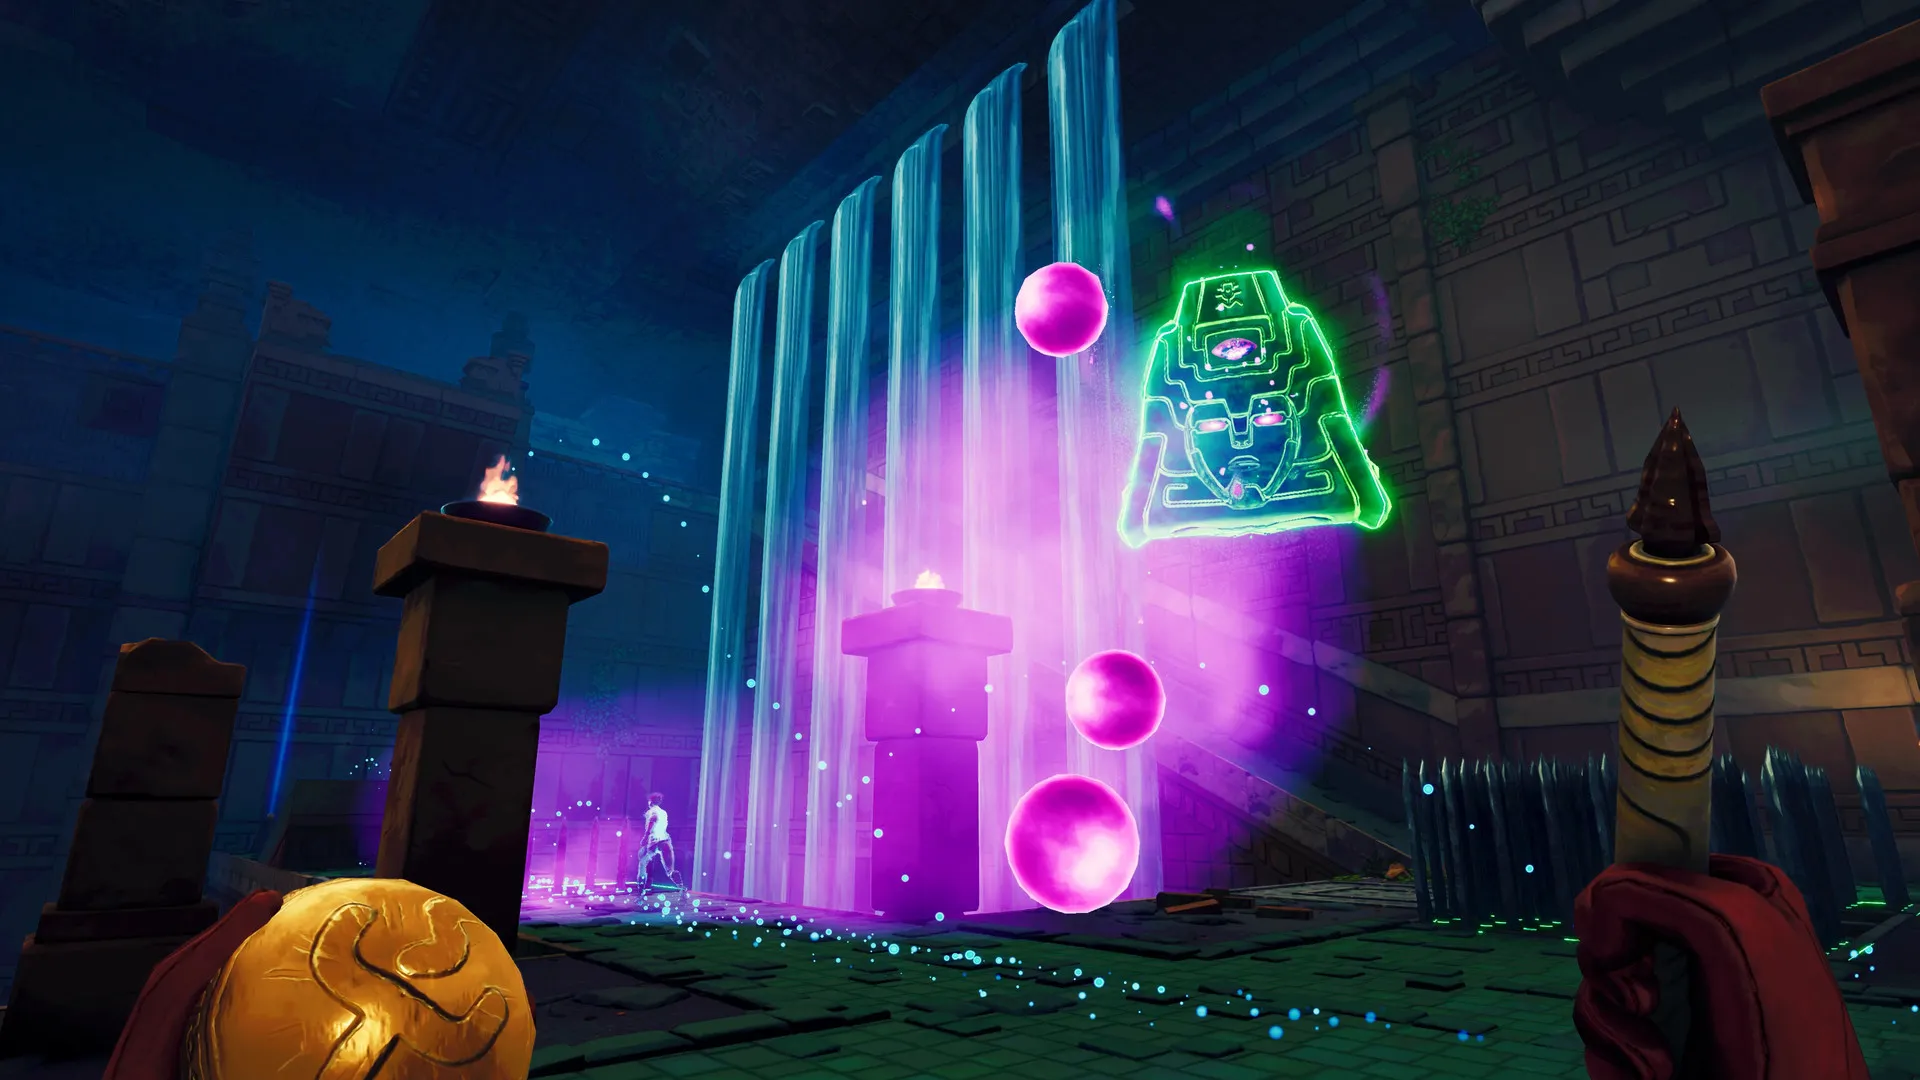 Phantom Abyss screenshot showing a whip in the character's hand, and various obstacles and floating phantom heads in a tomb ahead